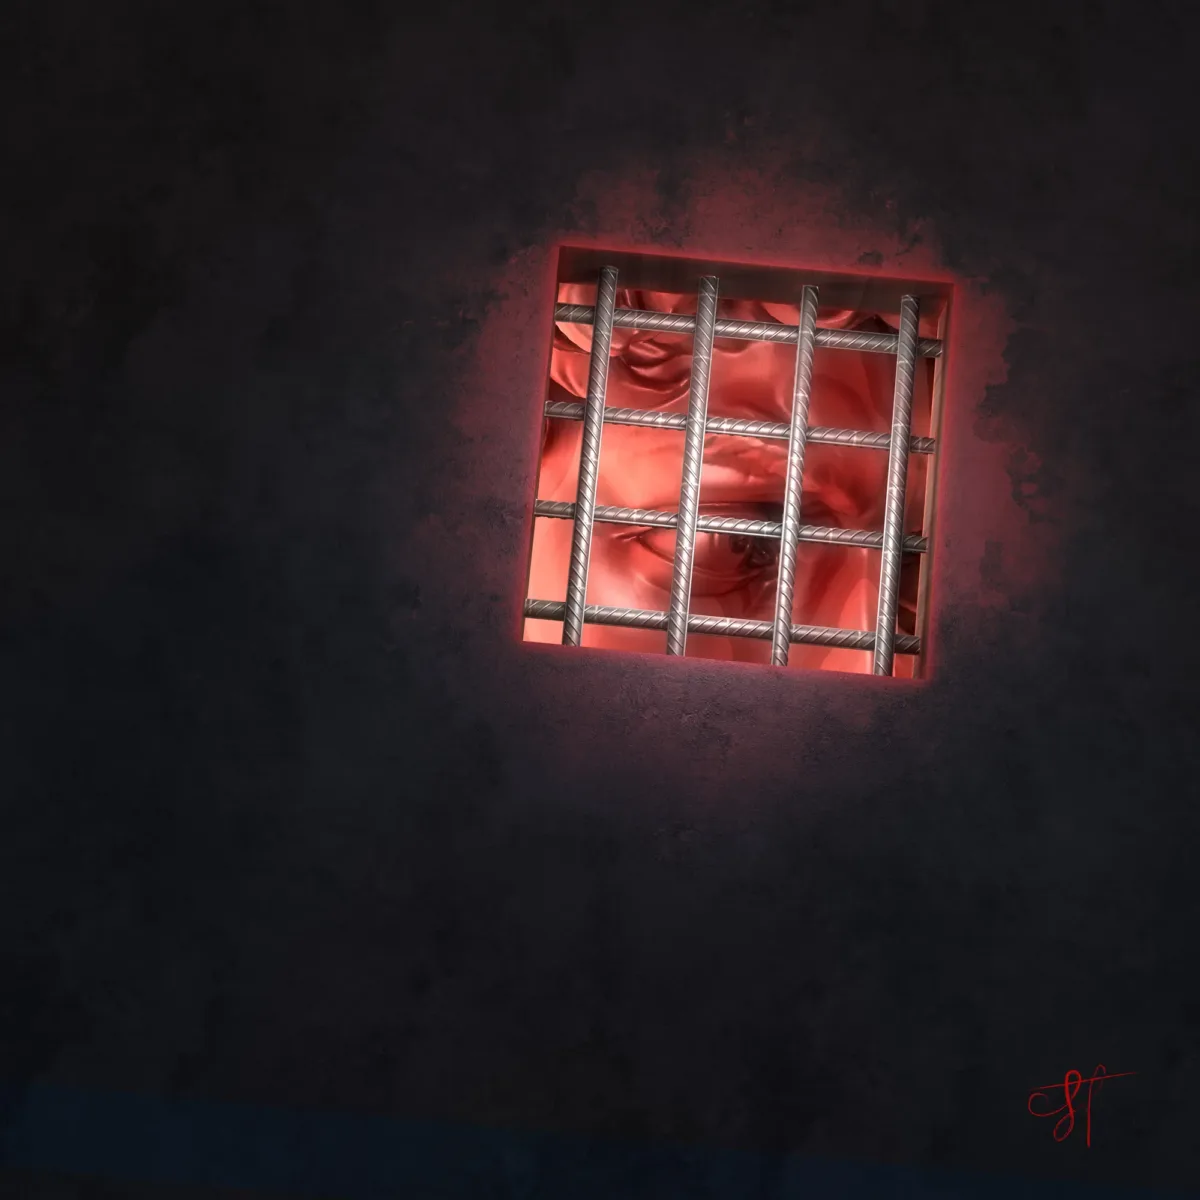 Print from contemporary artist Gabriel Halo - David#41 for sell. In this version of the metamorphosis you can see protagonist under jail trellis with strong look in red tones.